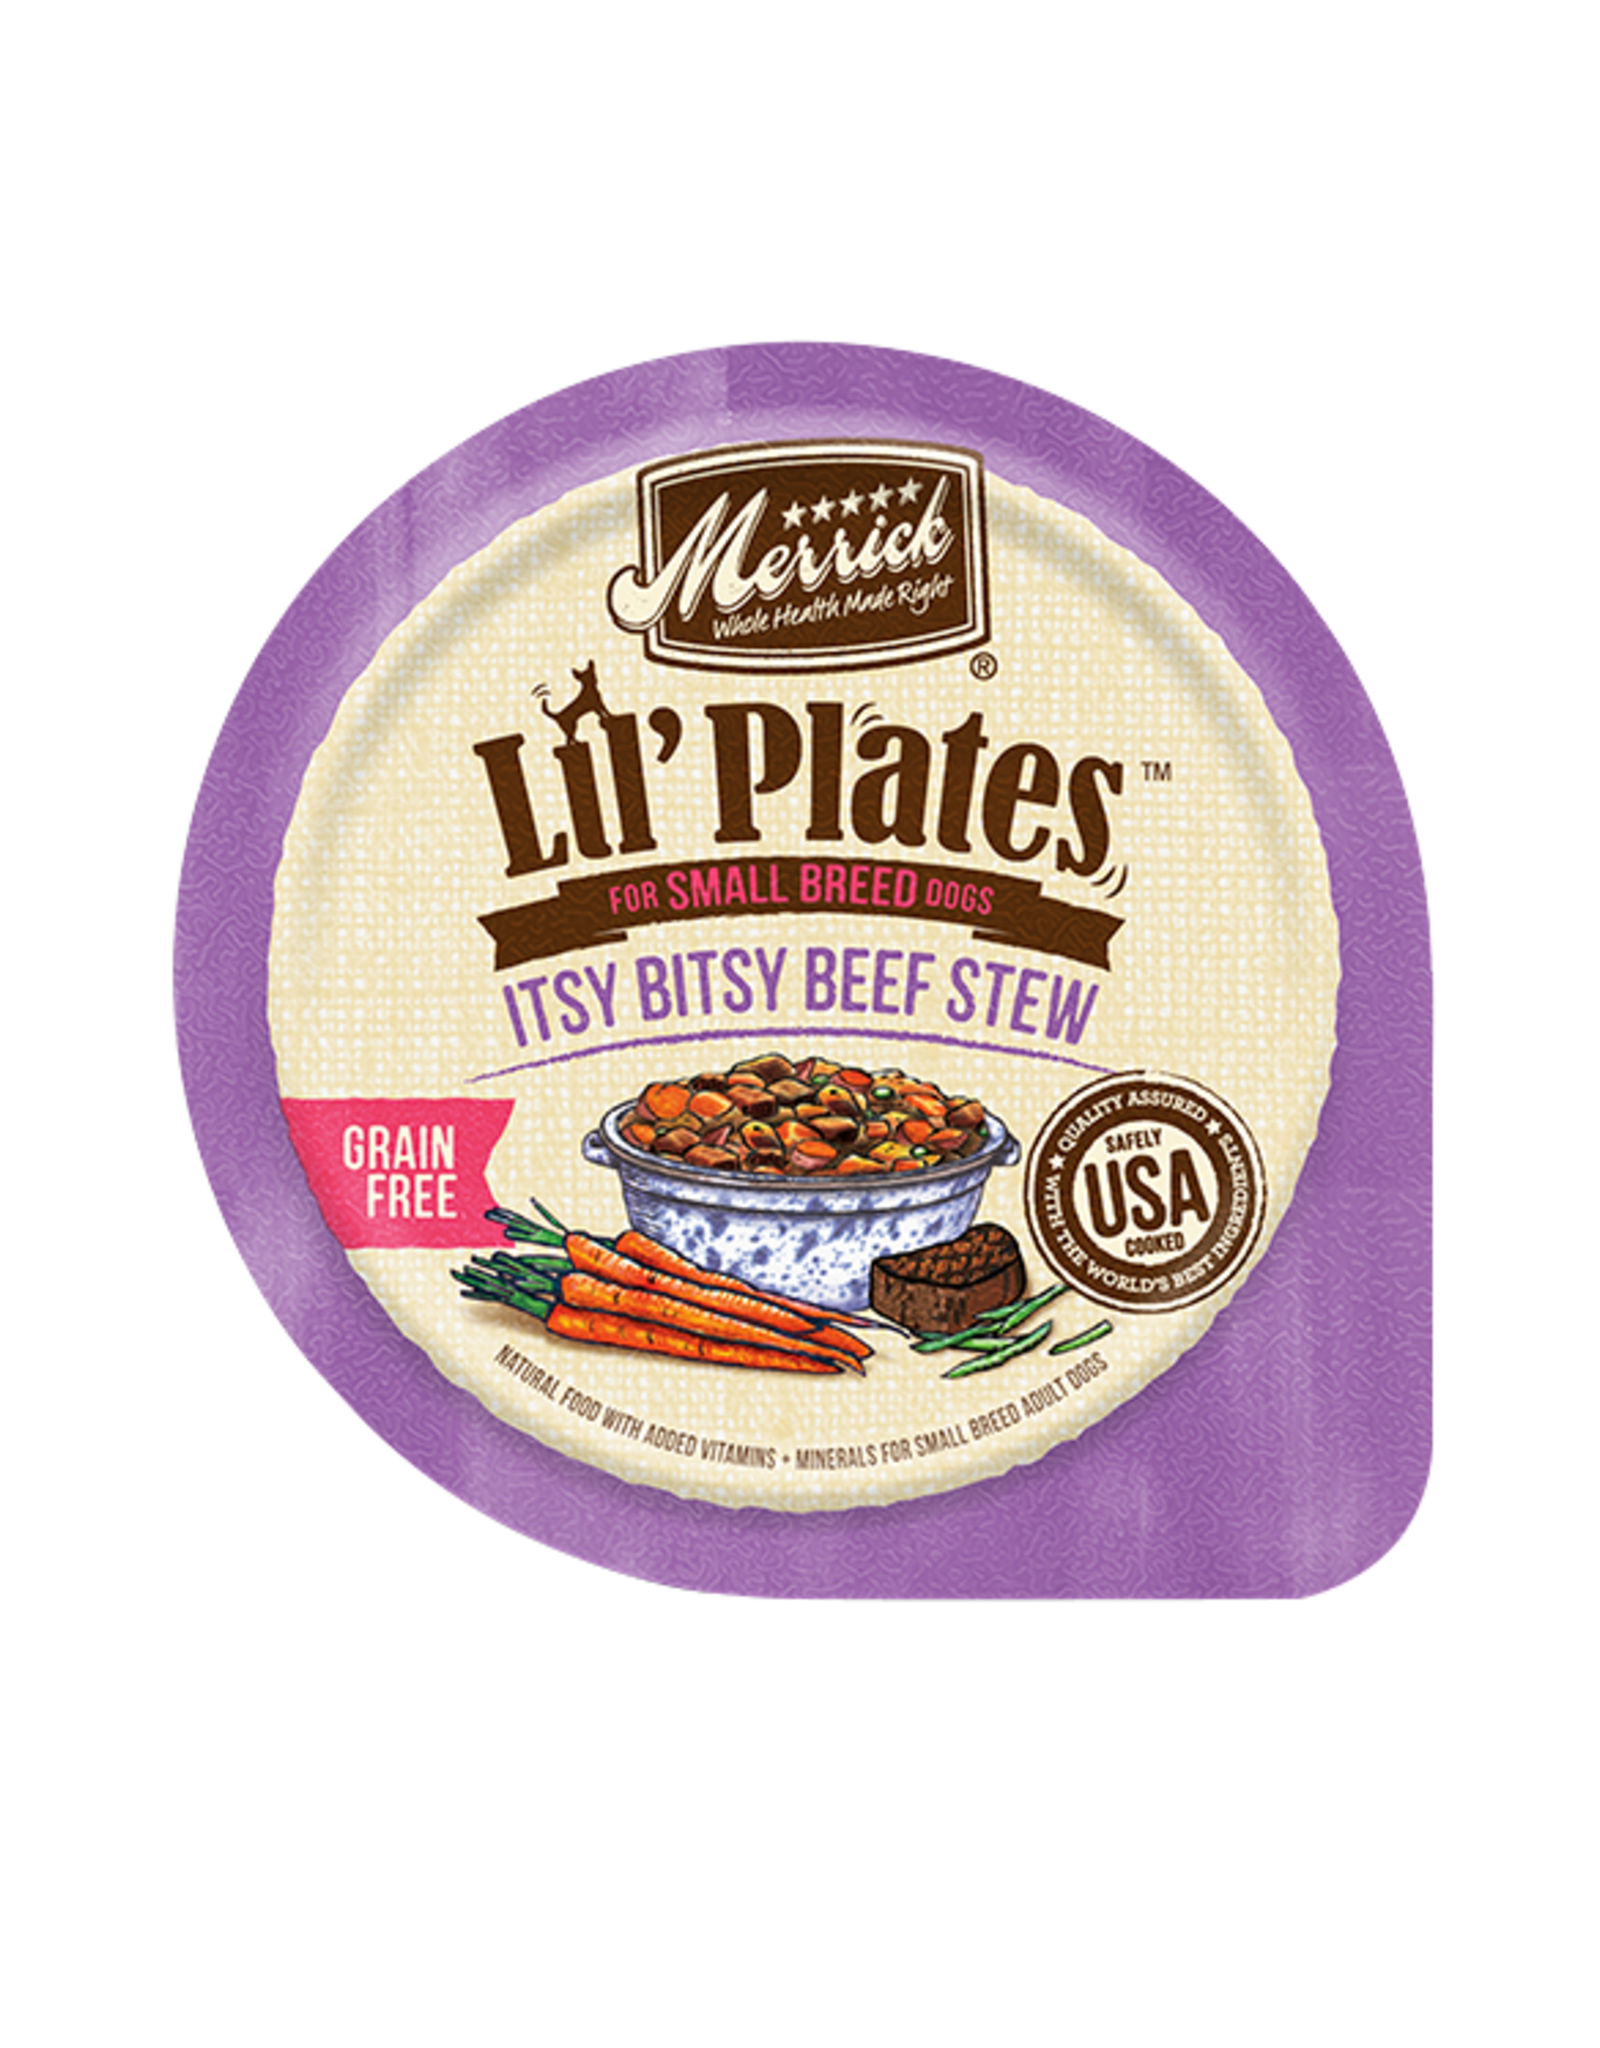 MERRICK PET CARE, INC. MERRICK DOG LIL' PLATES ITSY BITSY BEEF STEW 3.5 OZ TRAY CASE OF 12